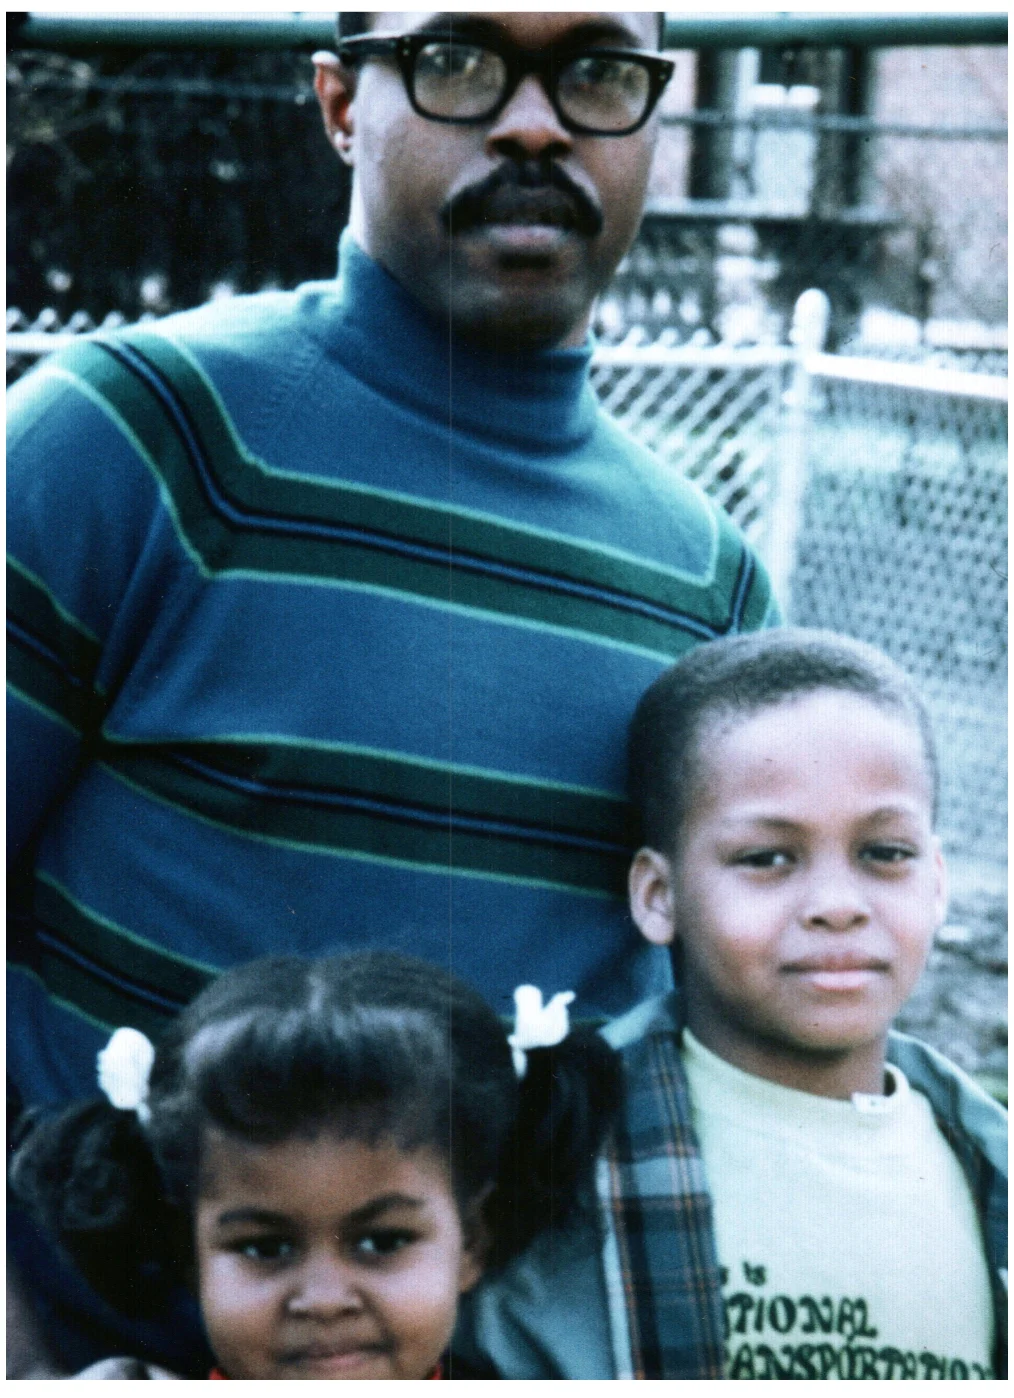 Fraser C. Robinson III, a Black man with a deep skin tone, wears a blue and green striped sweater and glasses and stands in front of a young Michelle and Craig Robinson